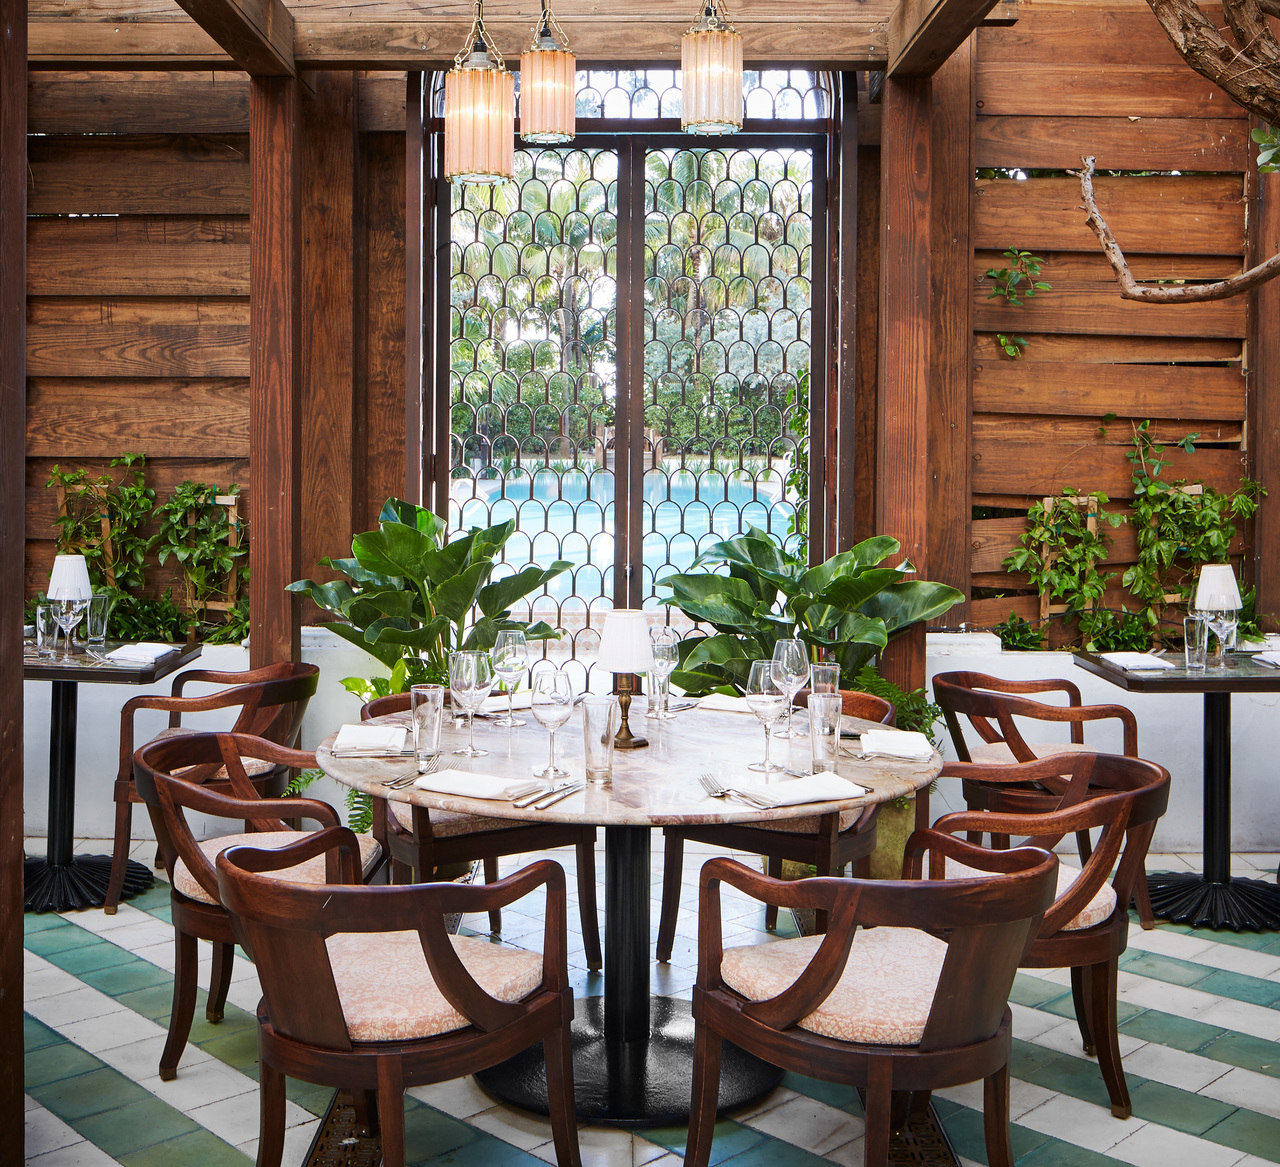 Wooden dining table, chairs and potted plants